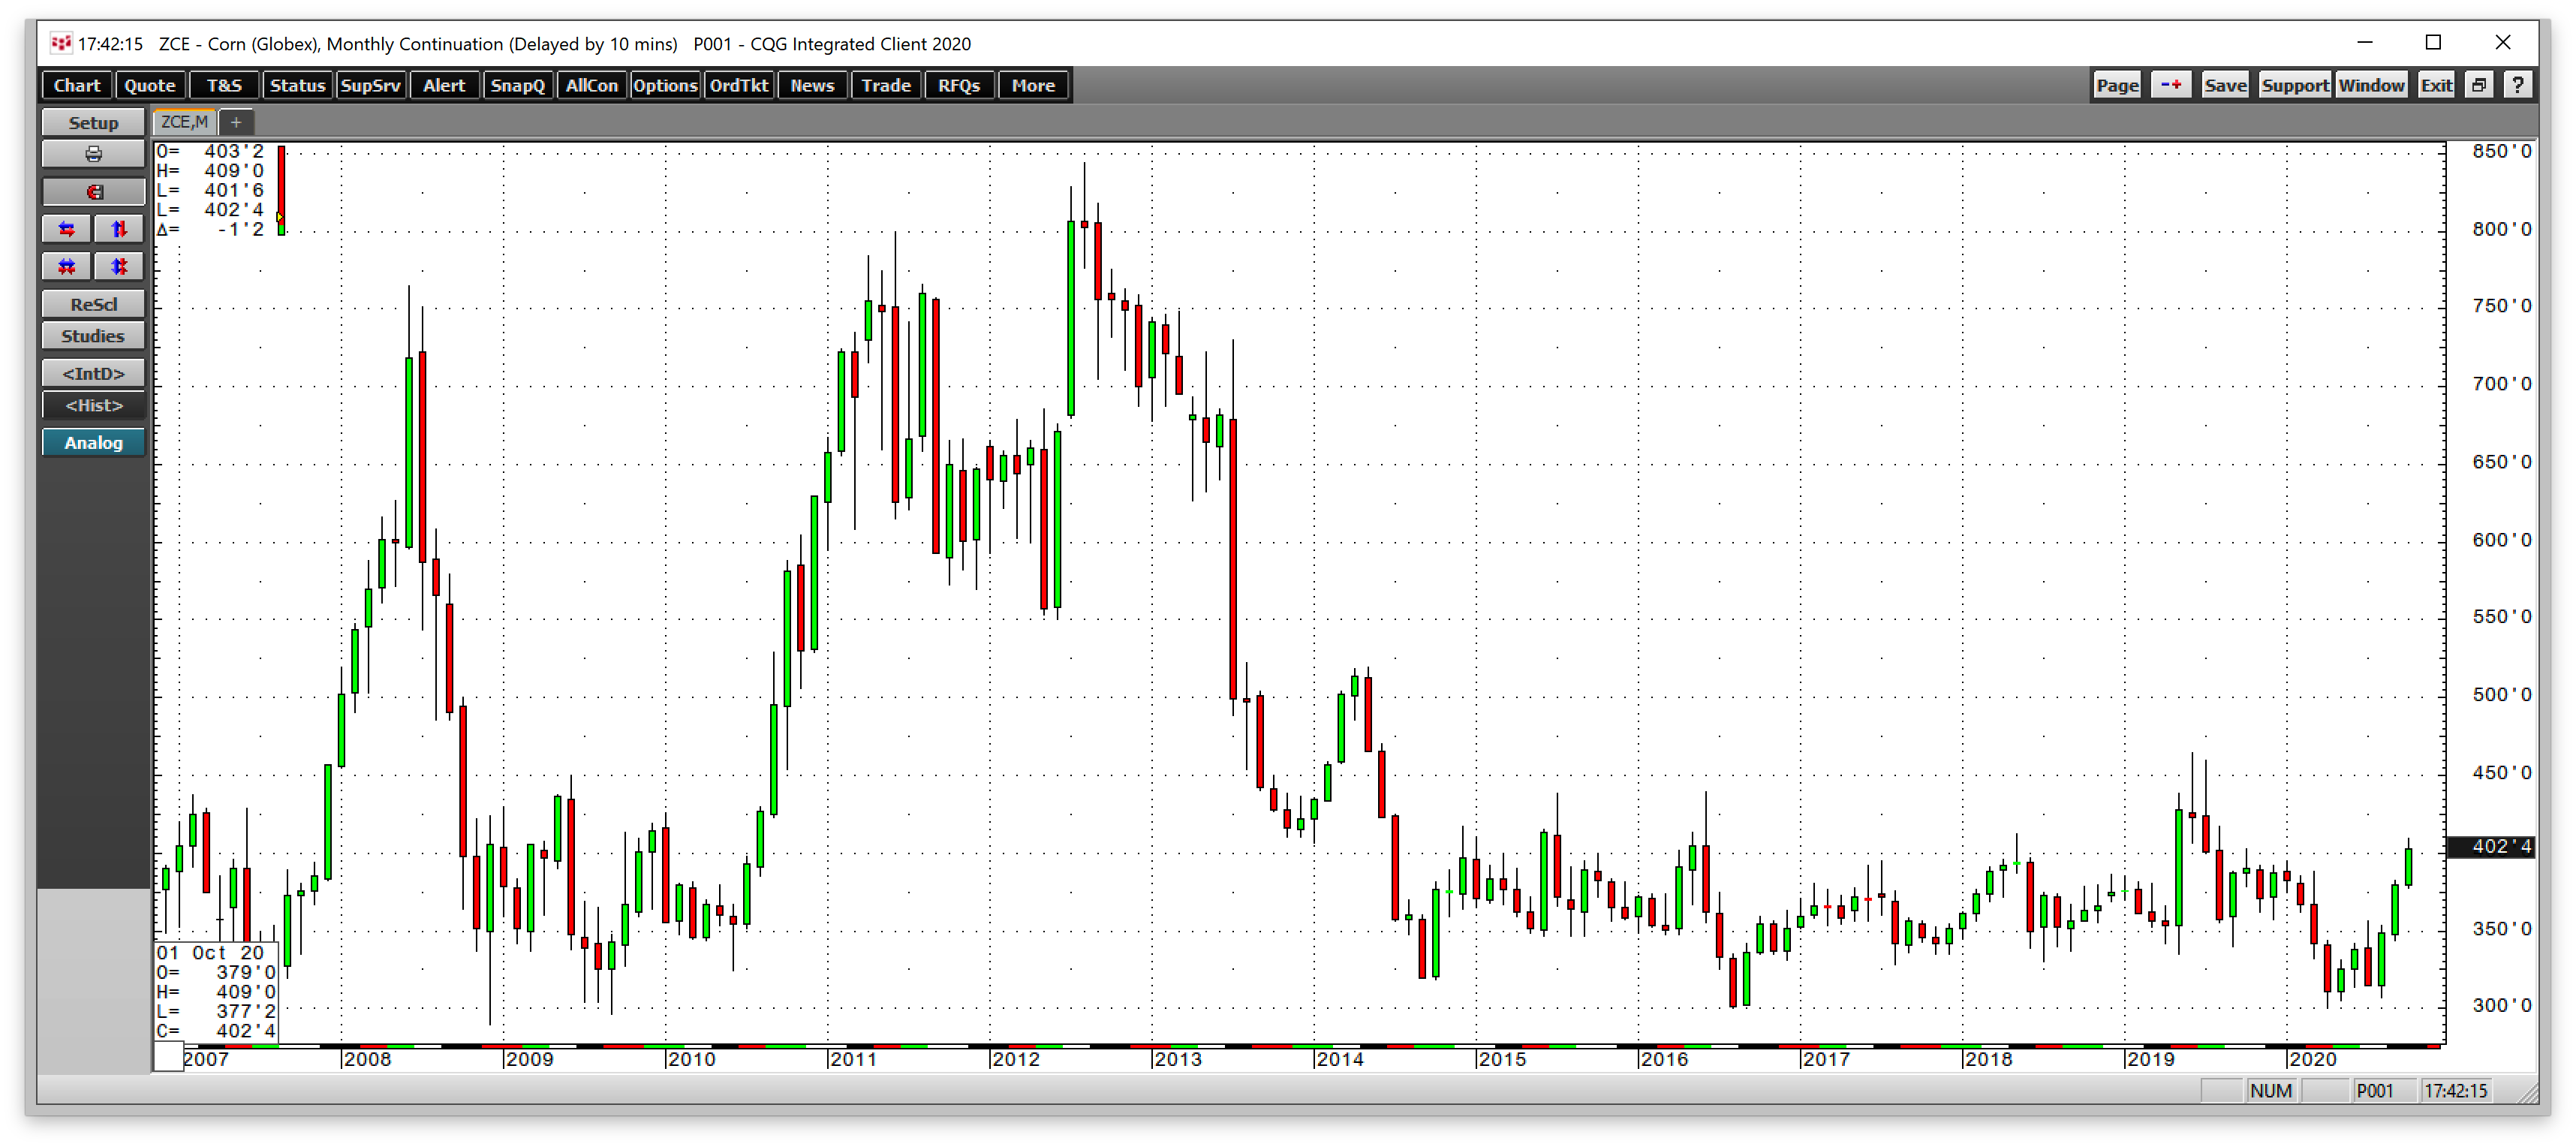 Corn Futures Monthly Chart